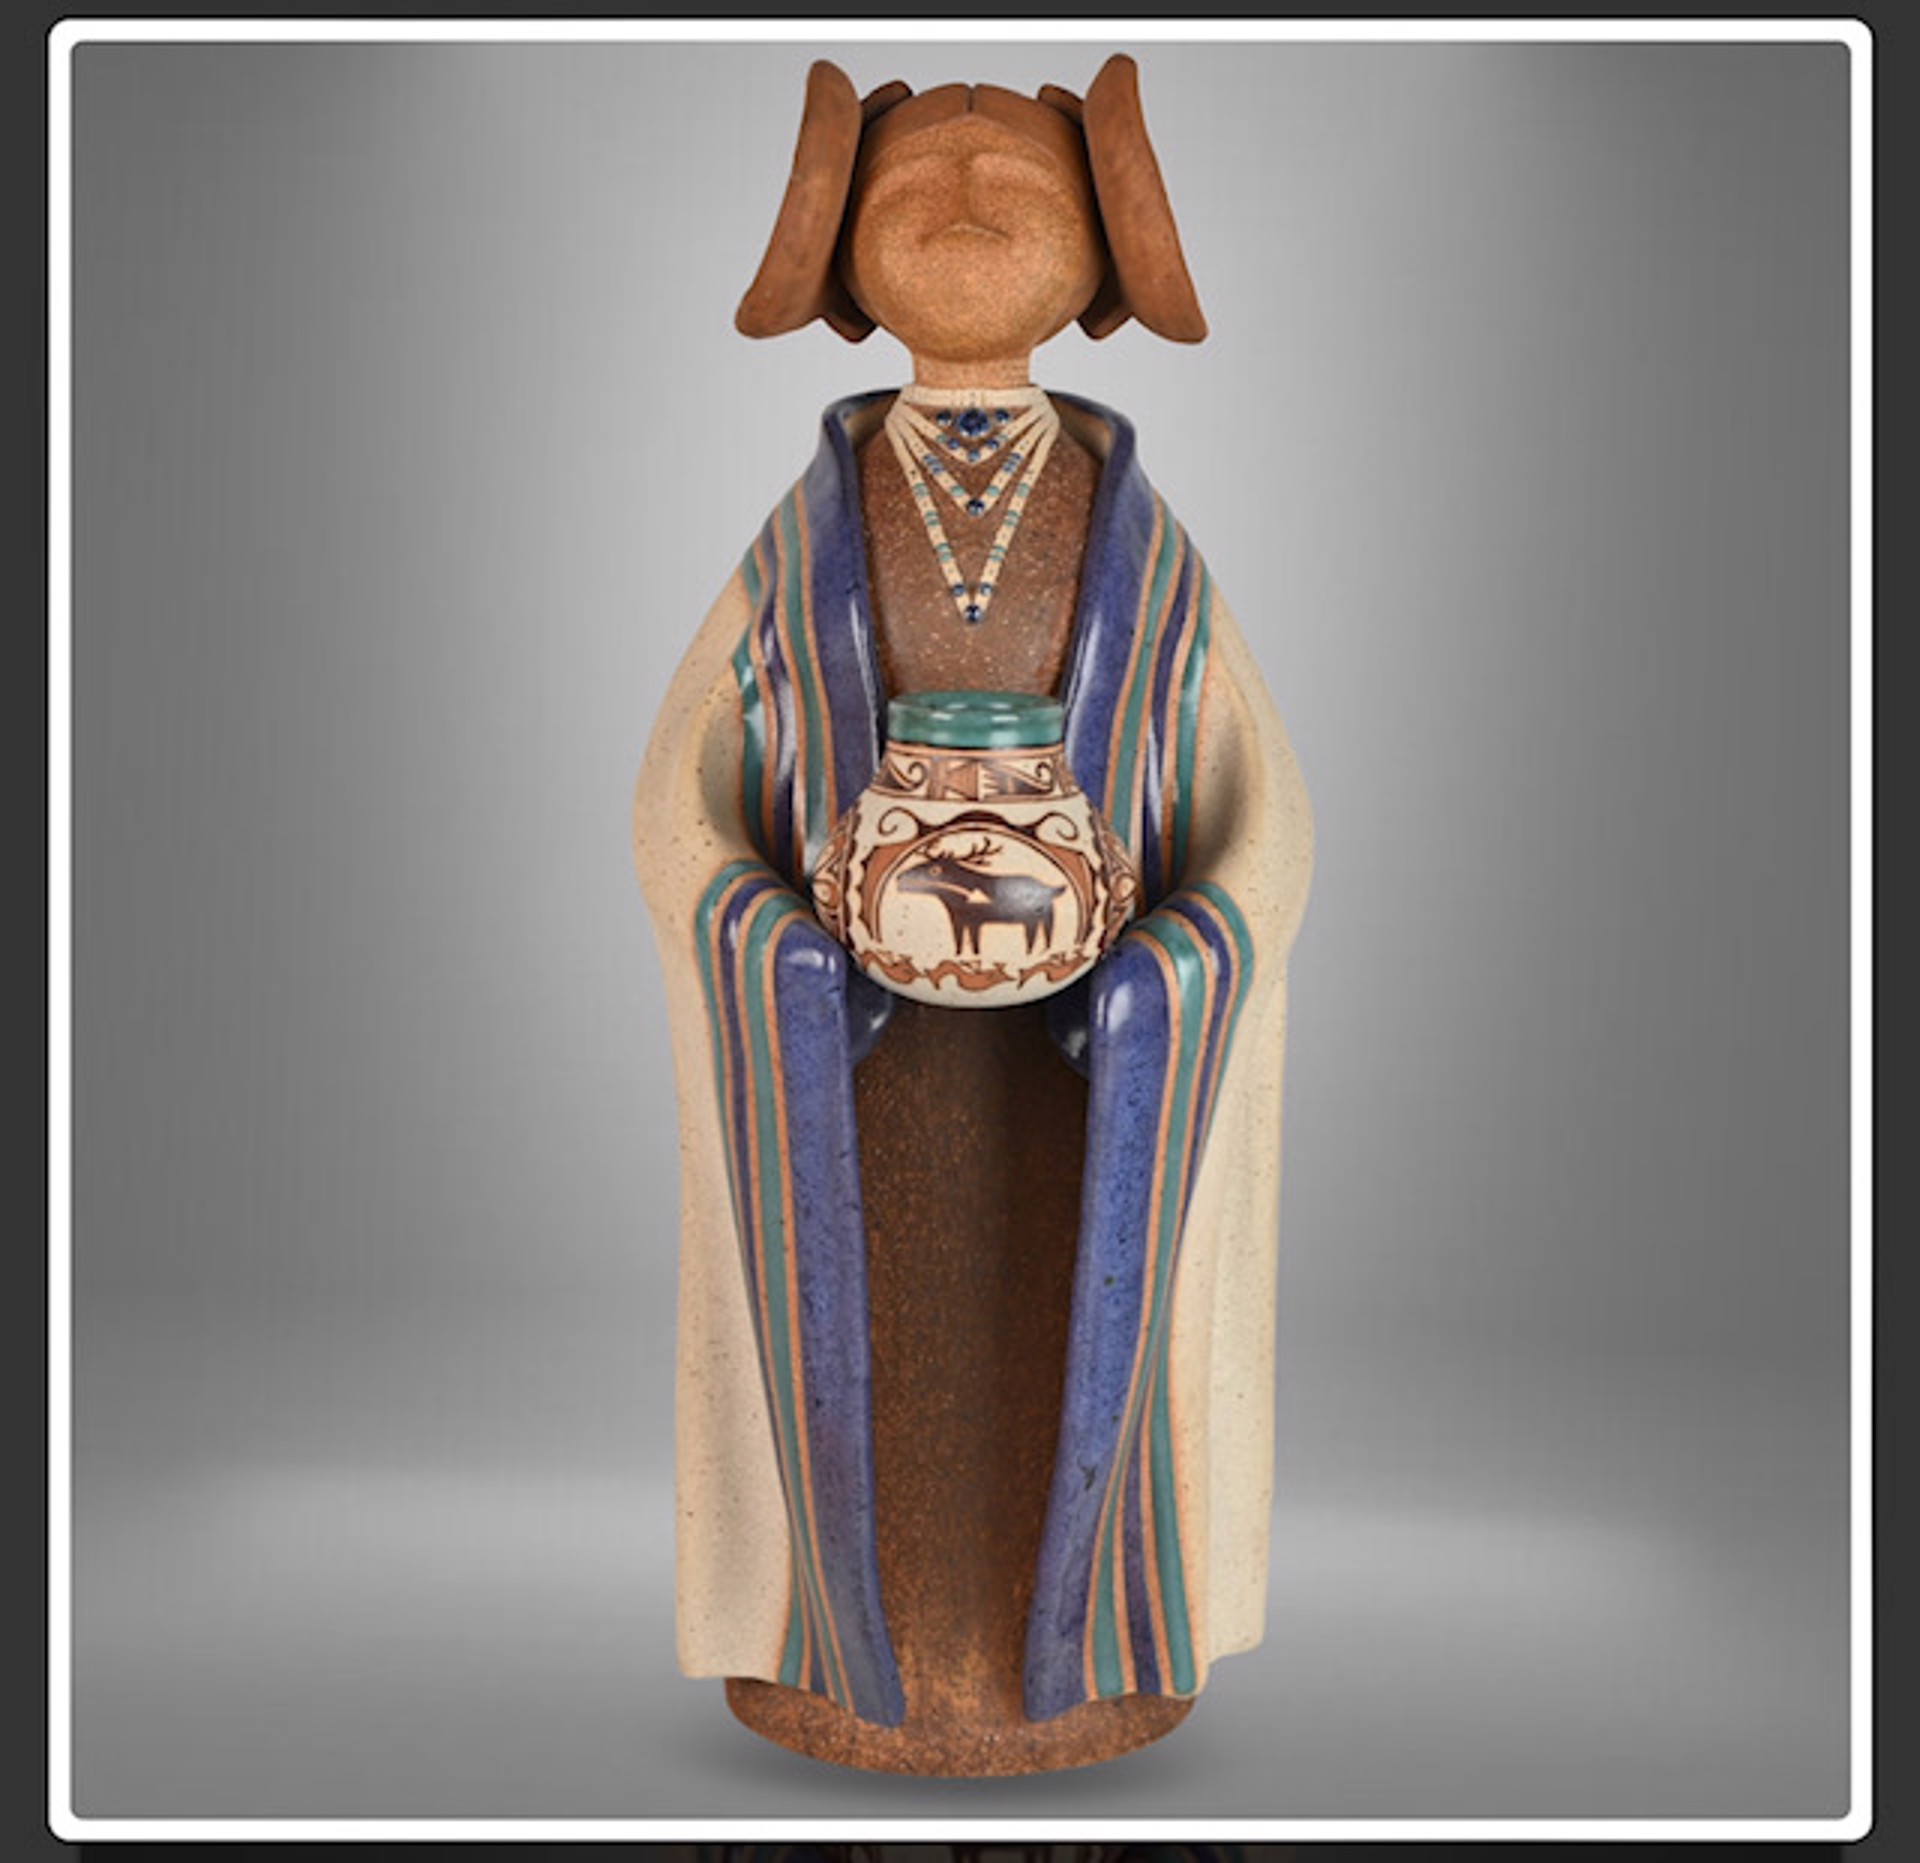 Jaramillo Commission – Navajo Woman – Standing by Terry Slonaker